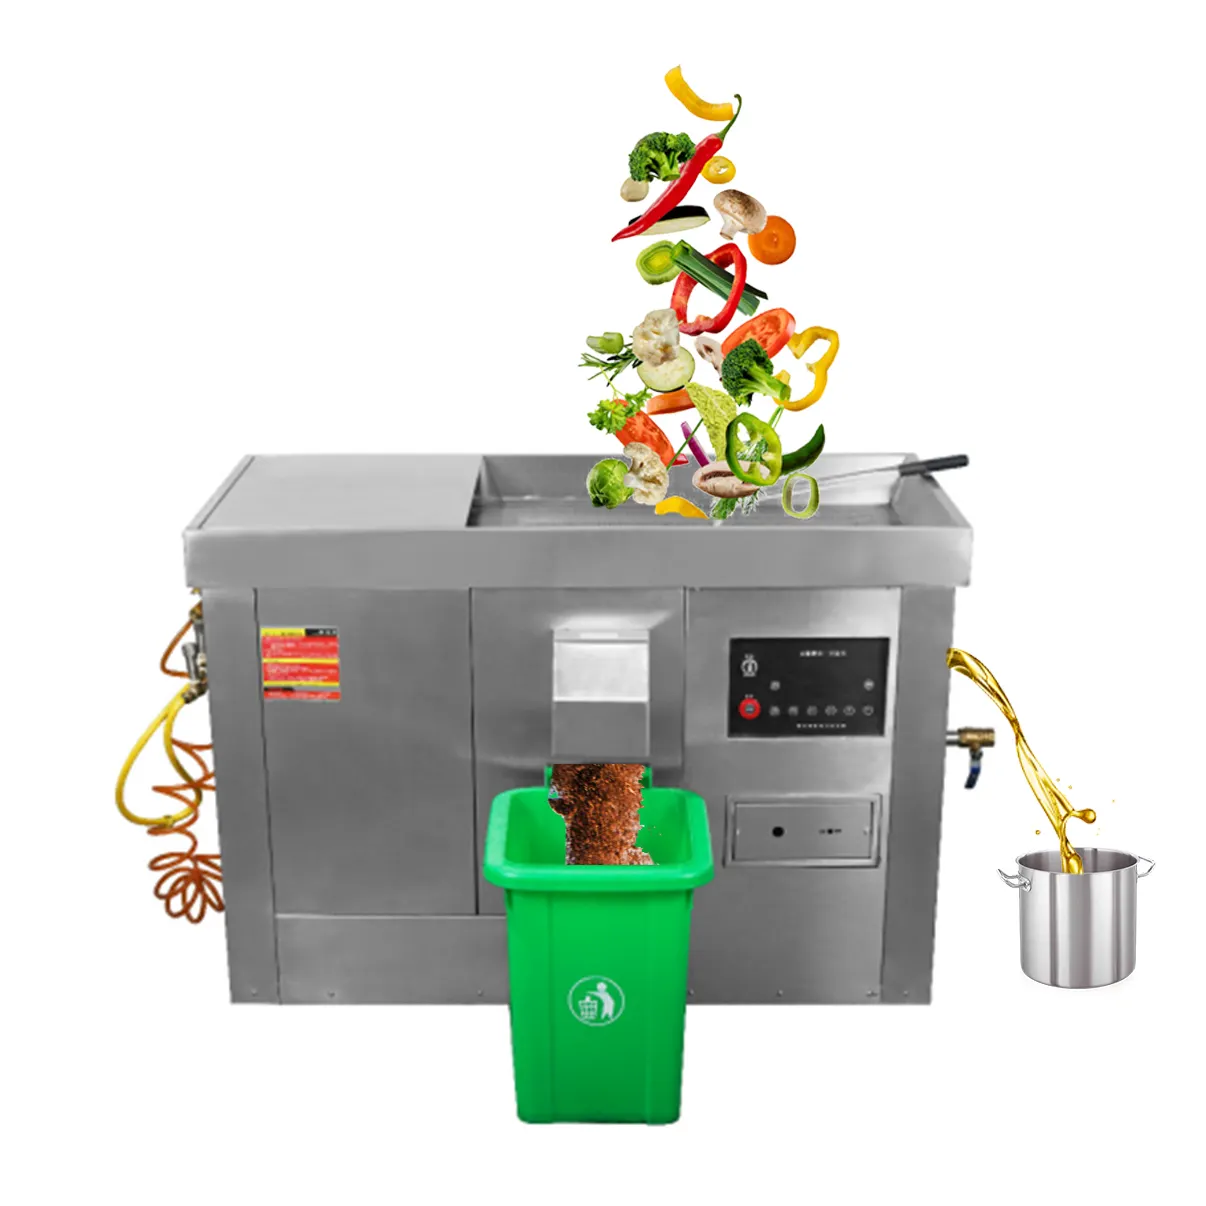 commercial kitchen food waste Oil-water separation garbage disposer machine food waste dehydrating food waste recycling mach